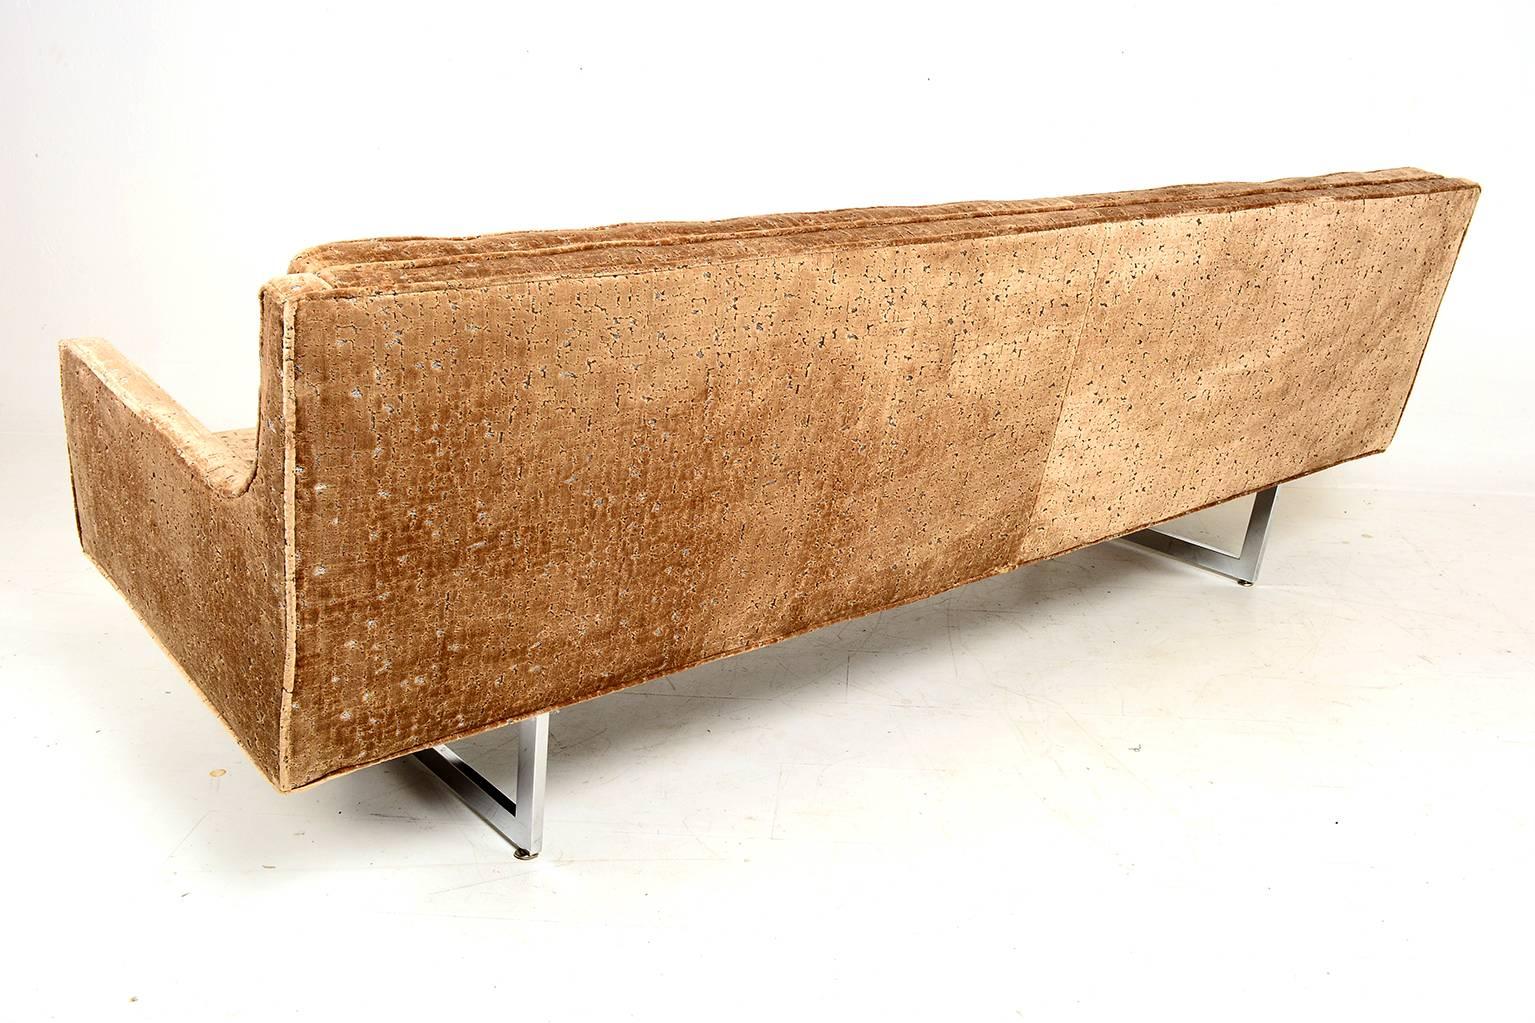 For your consideration a Mid-Century Modern sofa with new upholstery in gold tones. Mounted in clean modern legs in chrome-plated steal.

The upholstery has a contemporary pattern in gold tones. It has a rich vibrant tones in velvet finish. Sample